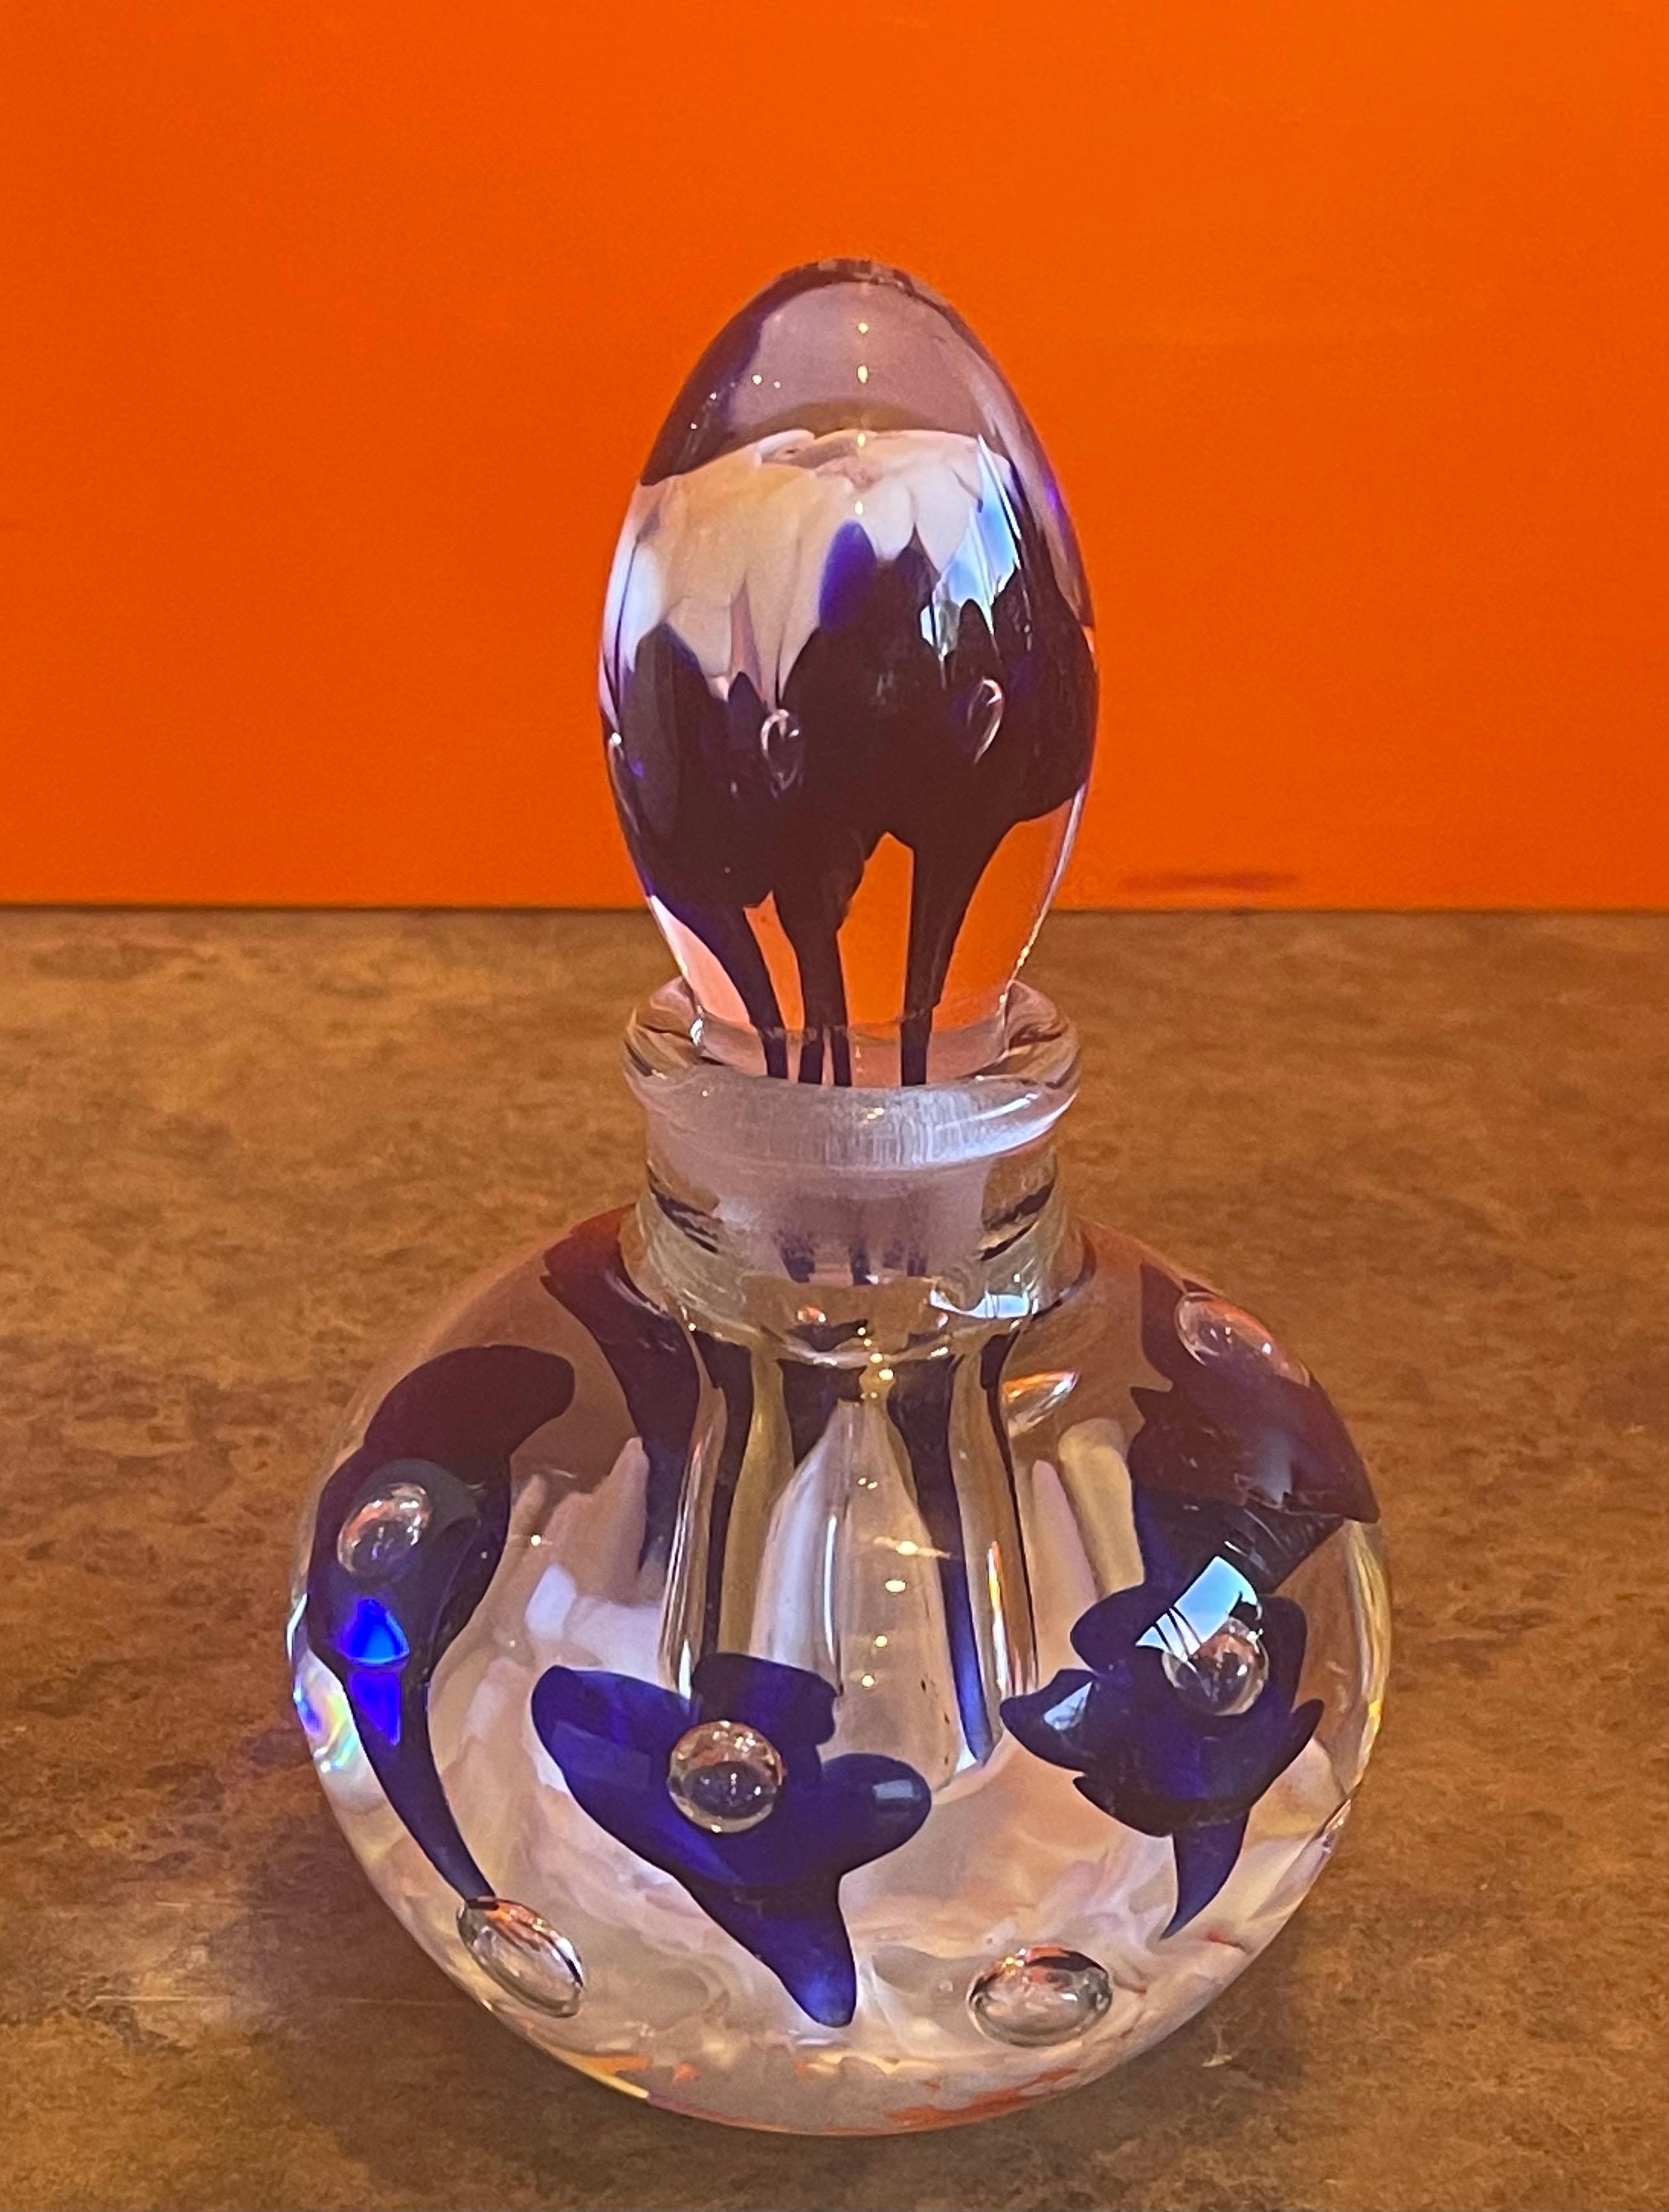 Beautiful art glass perfume bottle by Joe Rice, circa 1990s. The bottle is clear glass with white petals on the bottom and bright blue flowers floating in the glass. The piece is in very good condition with no cracks or chips and measures 3.75